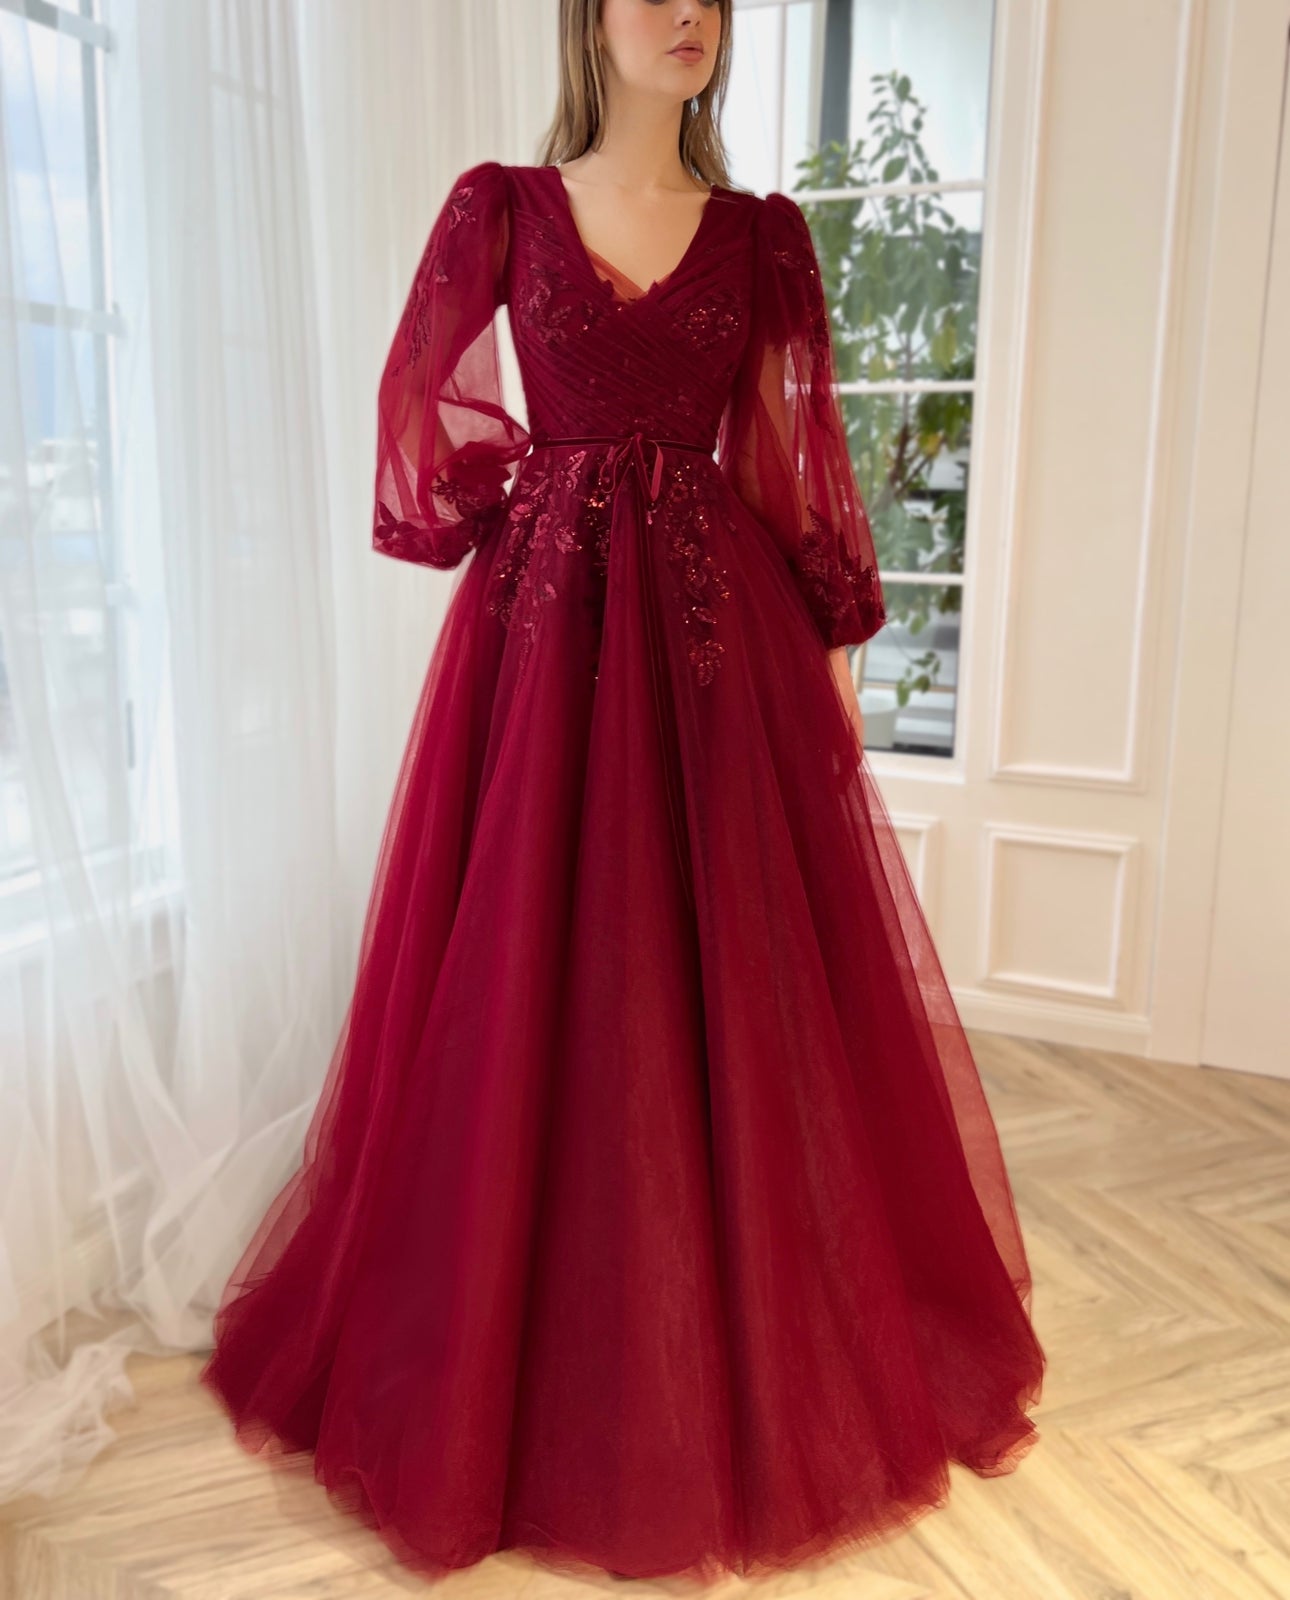 Red A-Line dress with embroidery and long sleeves